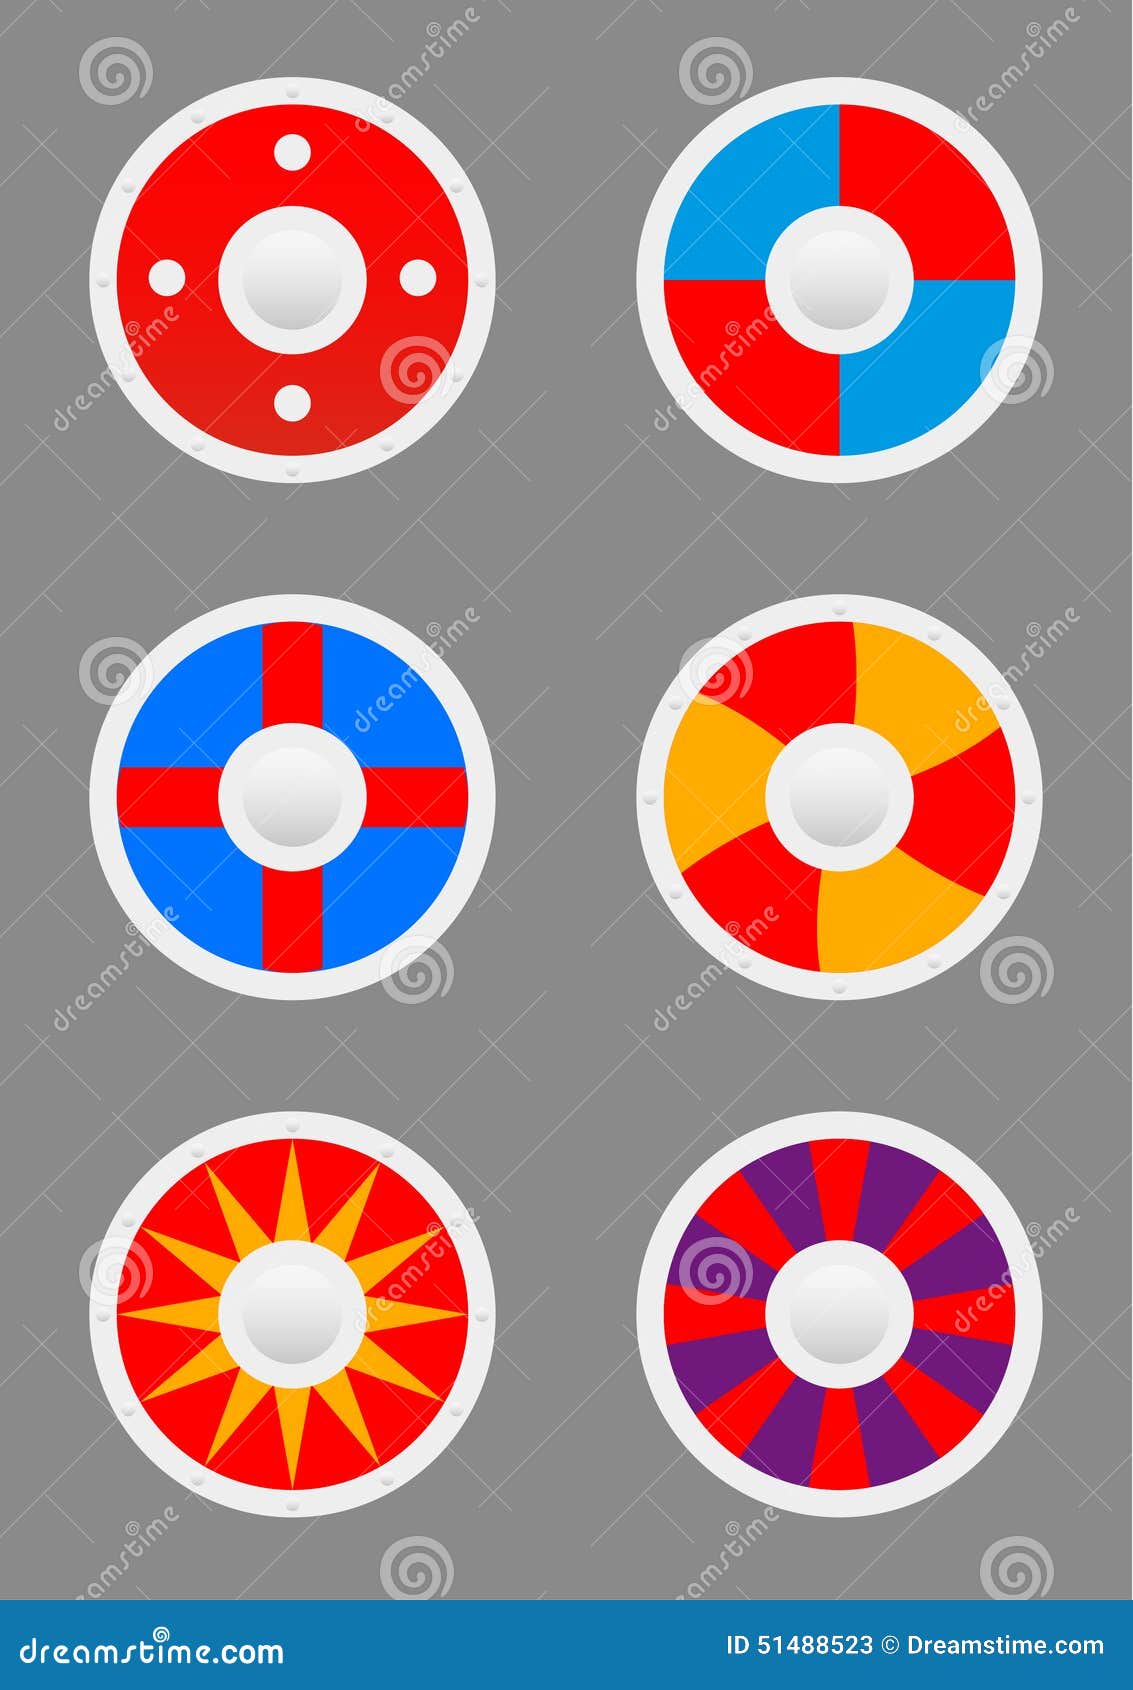 Round shields icons set stock vector. Illustration of knight